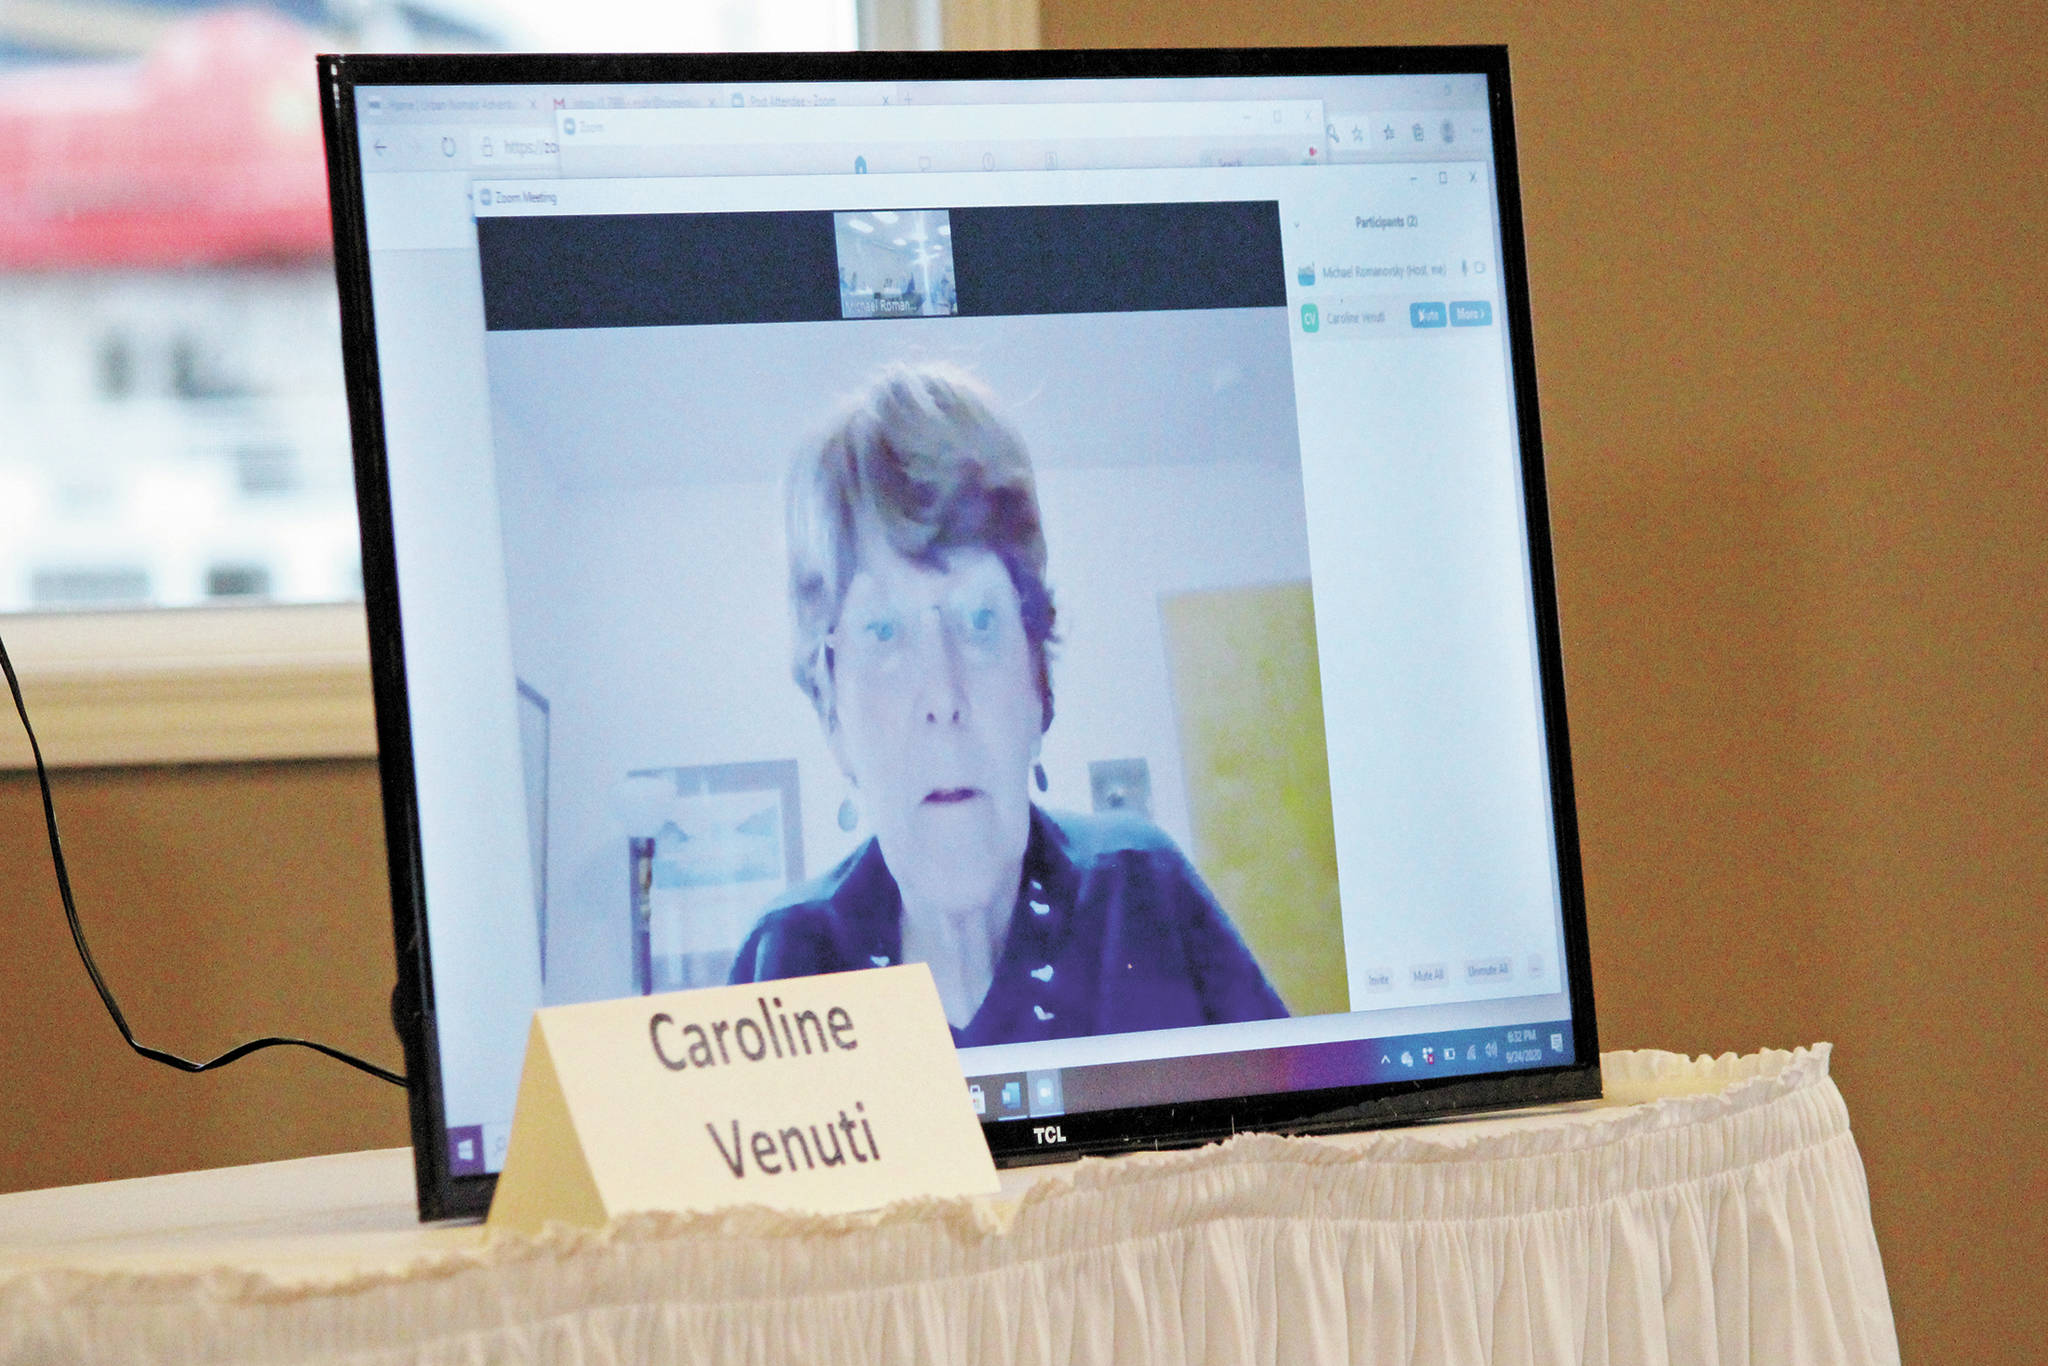 Homer City Council member Caroline Venuti, who is running for reelection on Oct. 6, speaks via Zoom during a candidate forum held Thursday, Sept. 24, 2020 by the Homer Chamber of Commerce & Visitor Center at Land’s End Resort in Homer, Alaska. (Photo by Megan Pacer/Homer News)